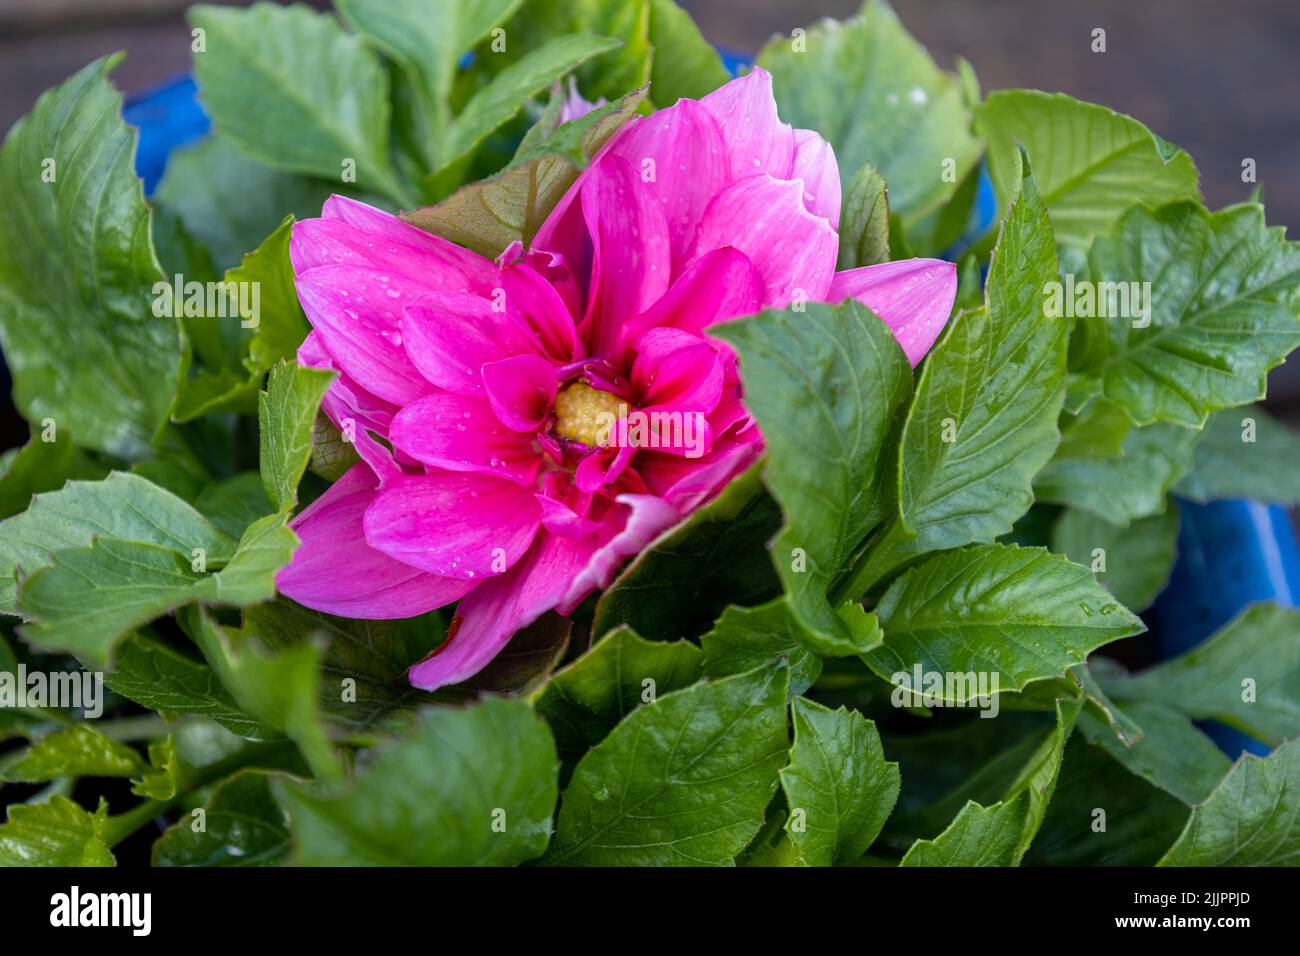 A close-up shot of a pink dahlias flower growing in the pot. Stock Photo